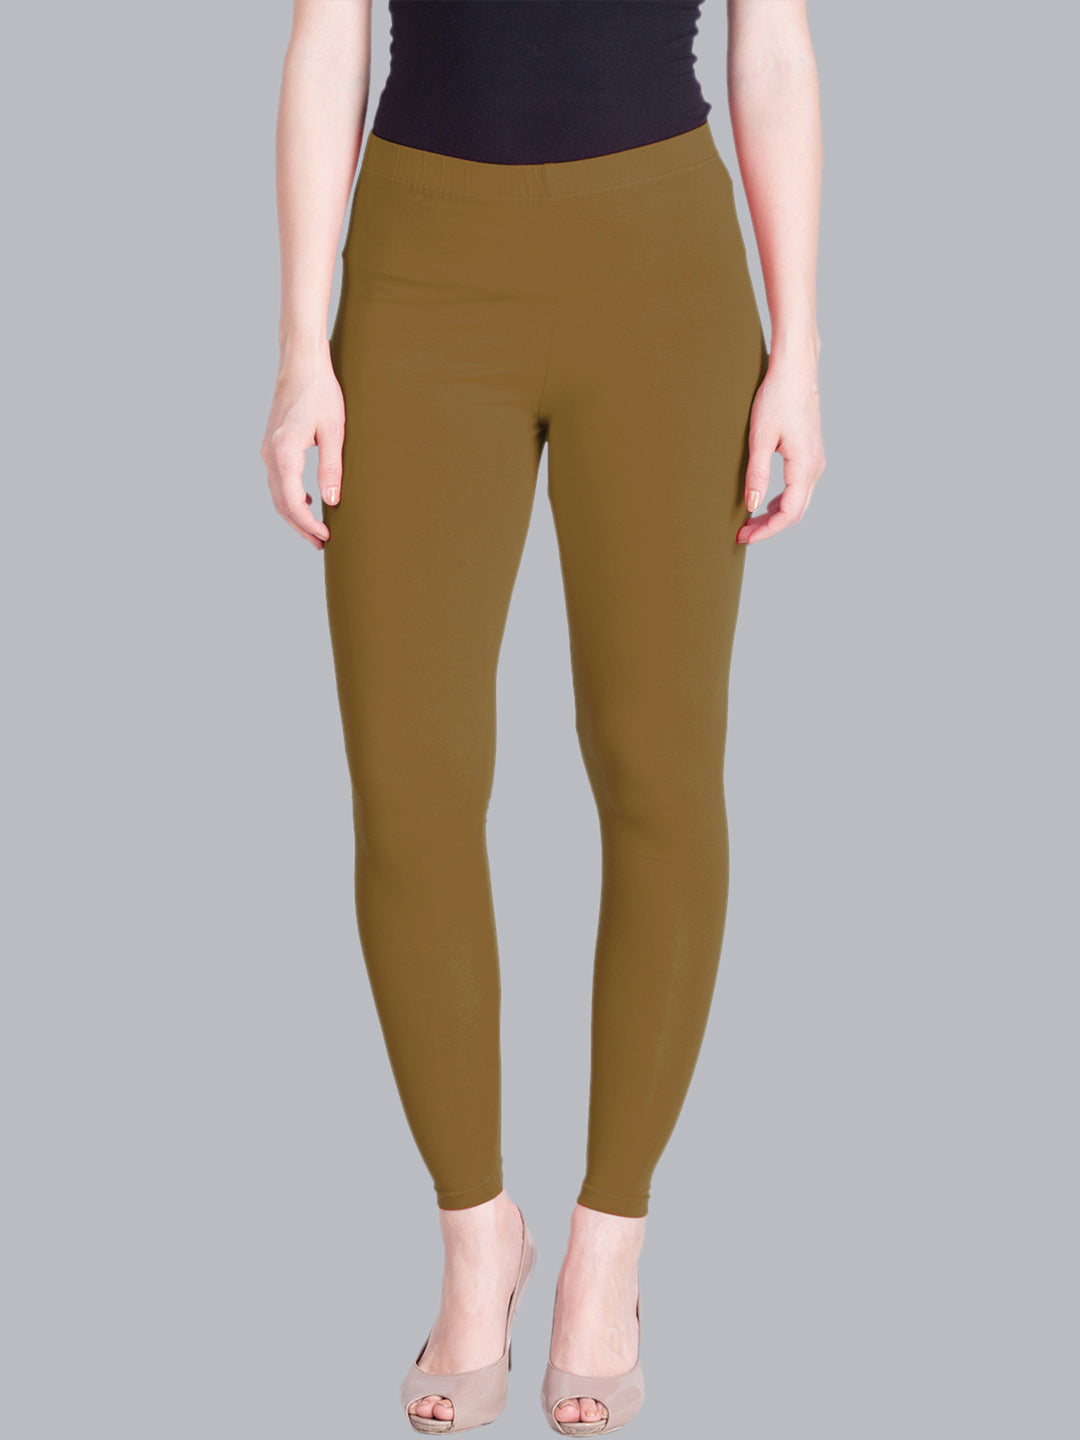 Wholesale Light Brown Ankle Length Cotton Legging at [40-499 Rs